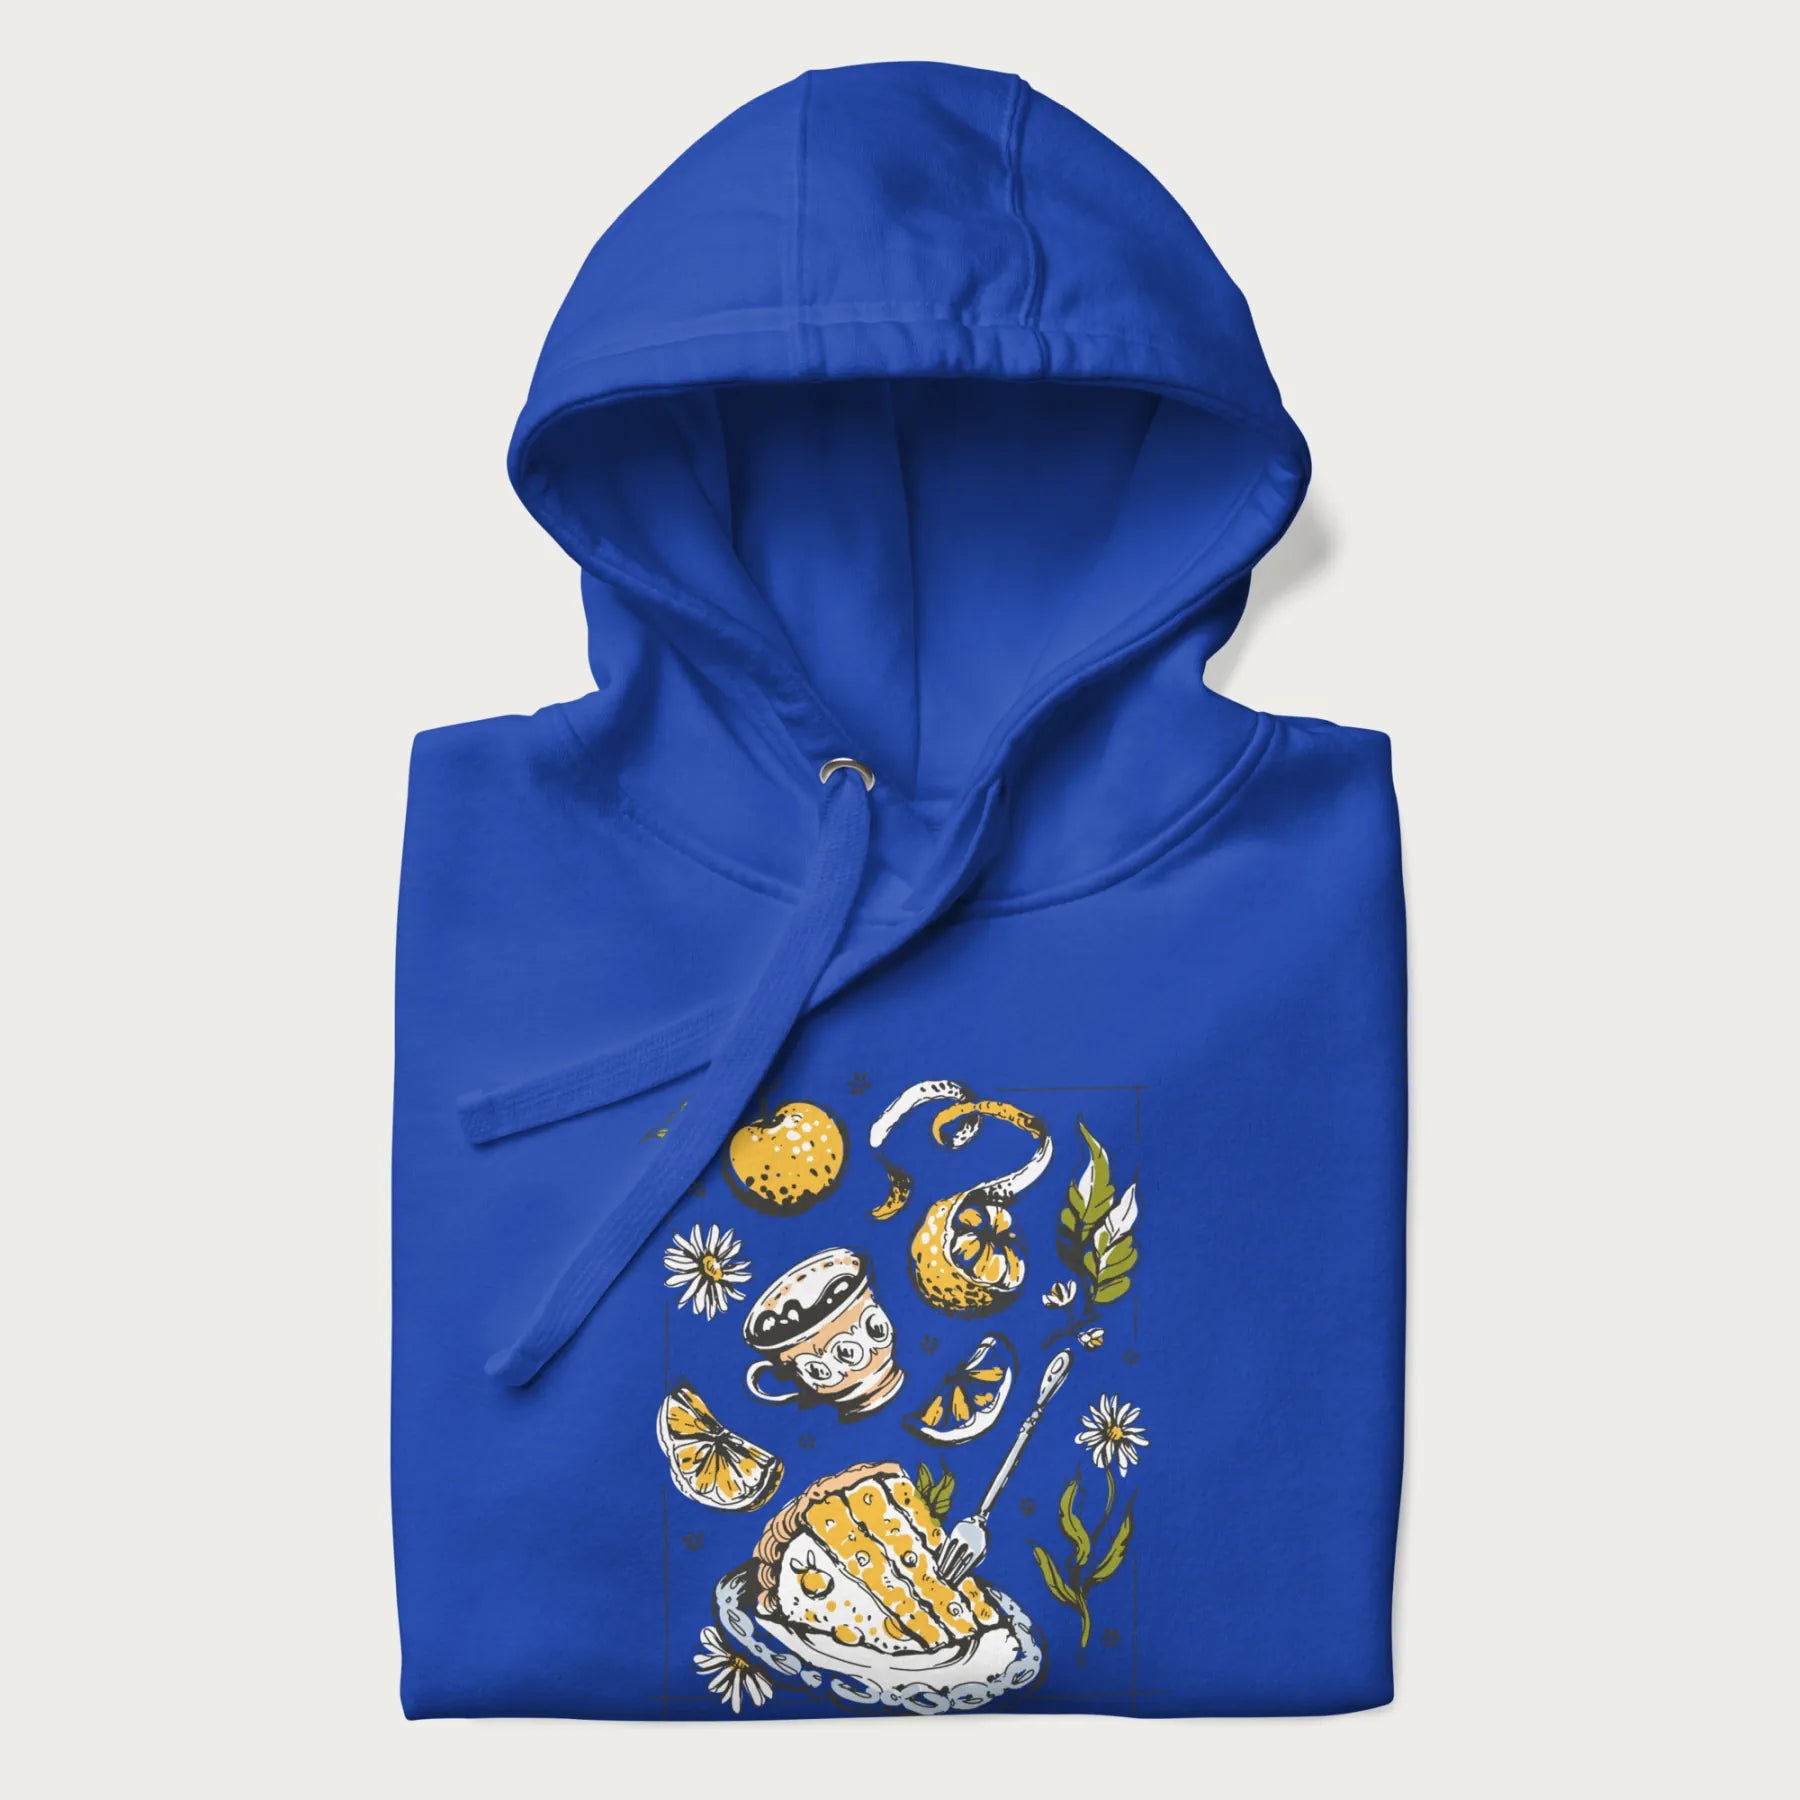 Folded royal blue hoodie featuring a Cottagecore-themed graphic with oranges, a floral porcelain cup, orange pie, and daisies.